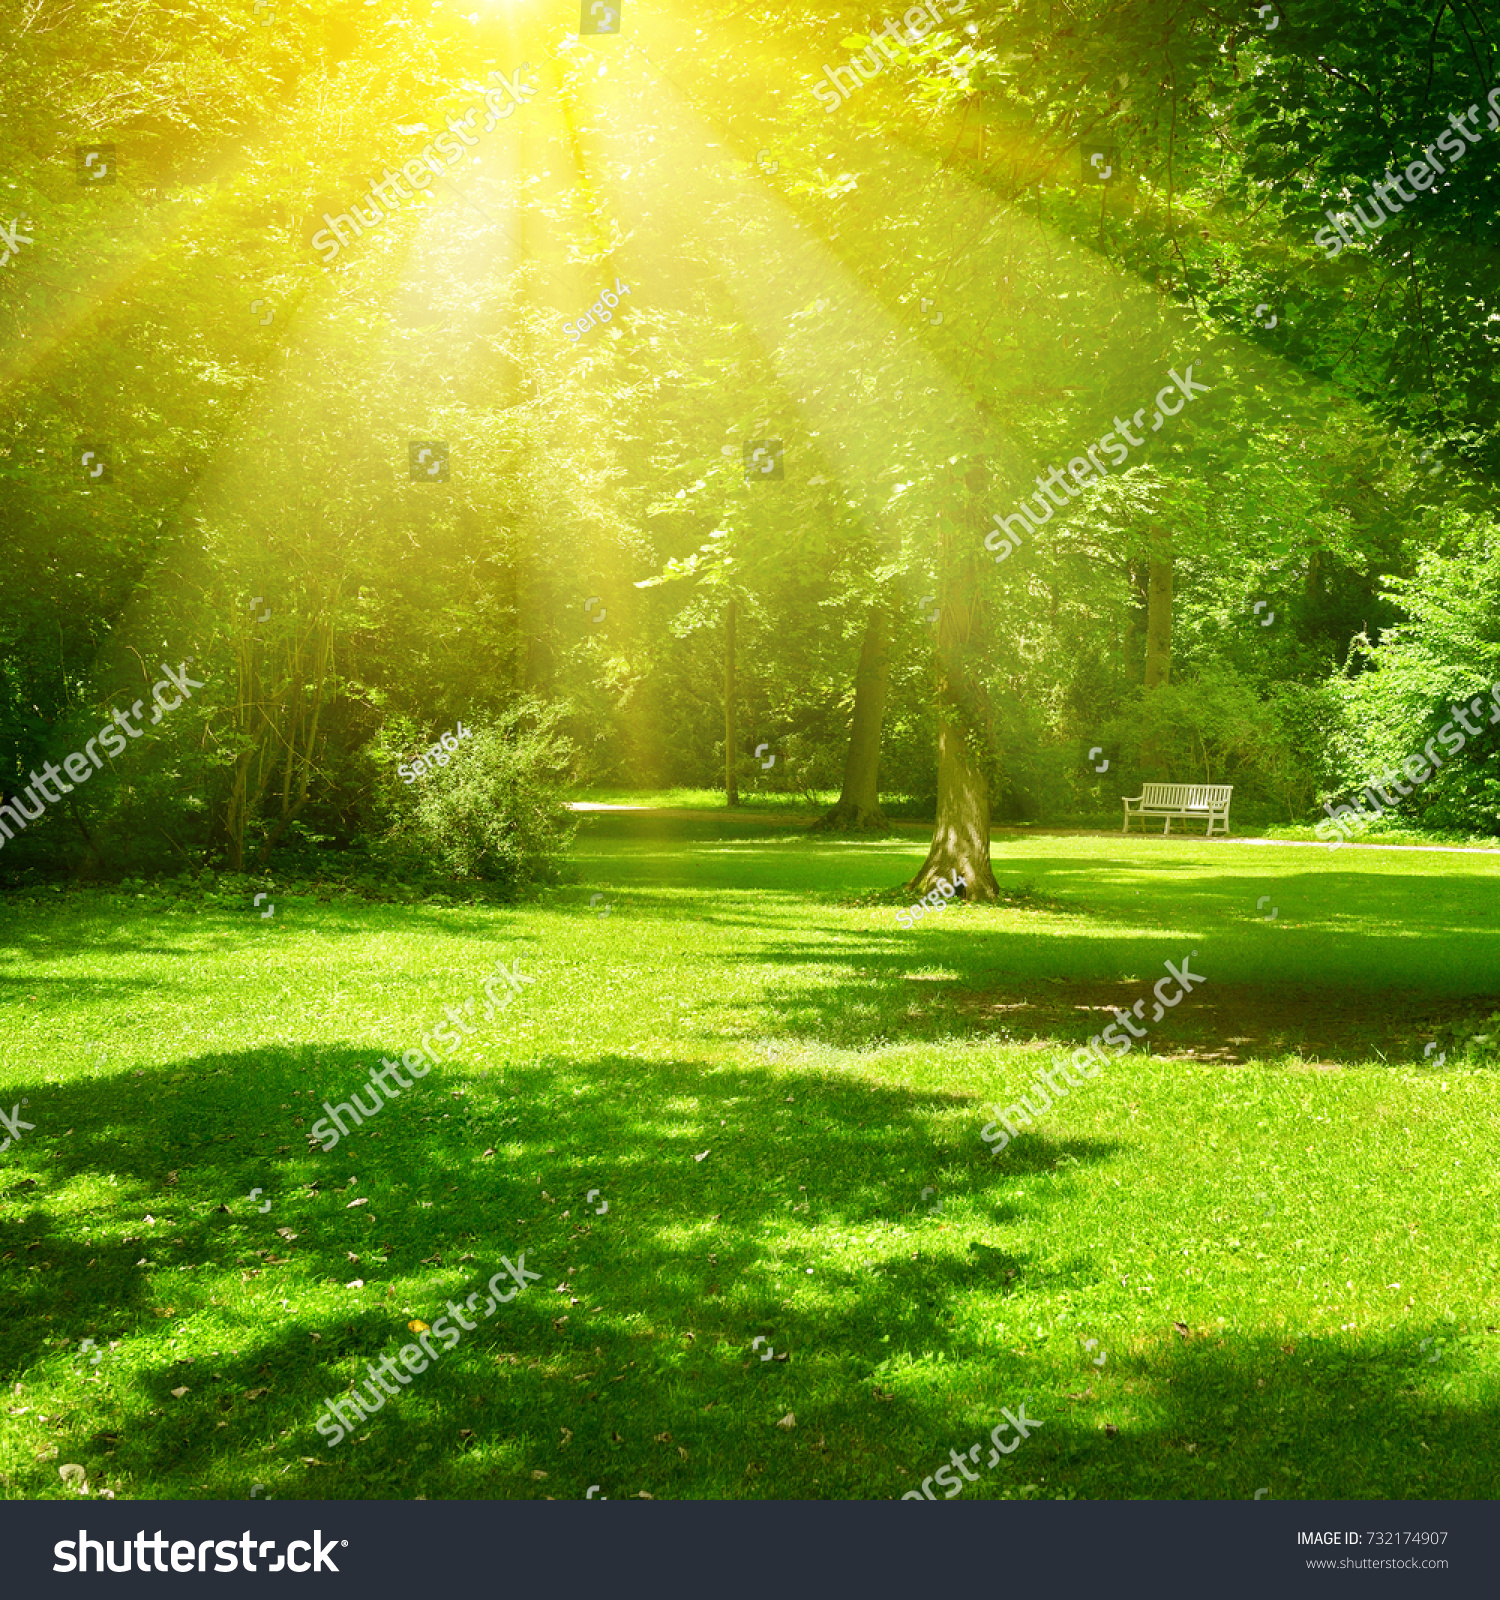 Bright sunny day in park. The sun rays illuminate green grass and trees. Summer landscape. #732174907